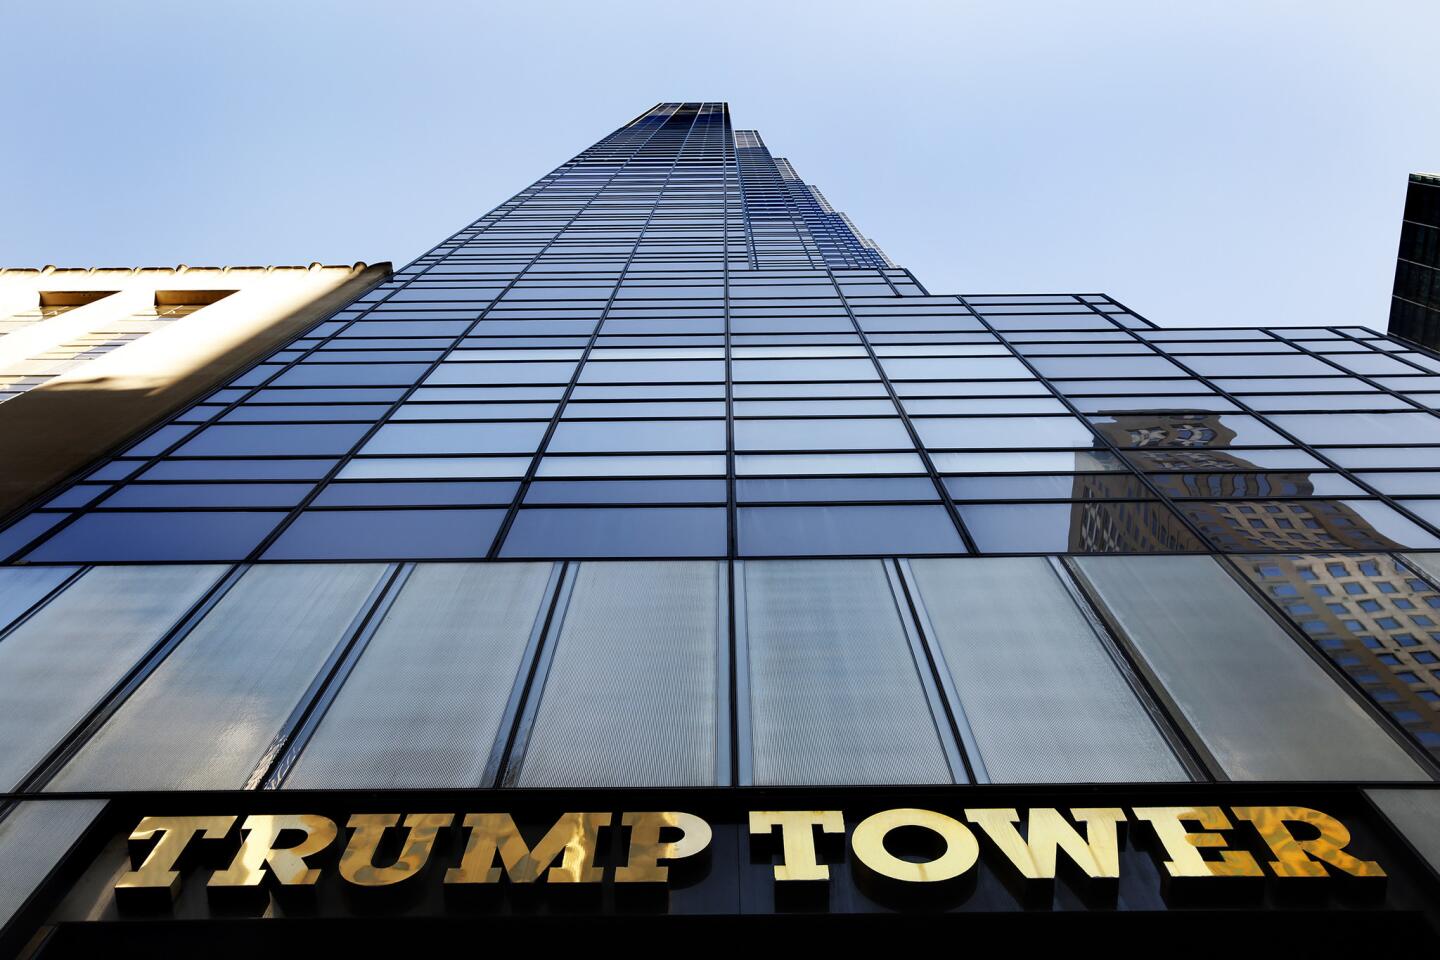 Donald Trump's penthouse in the Trump Tower on Manhattan’s Fifth Avenue takes up three floors and is decorated in 24-karat gold and marble.